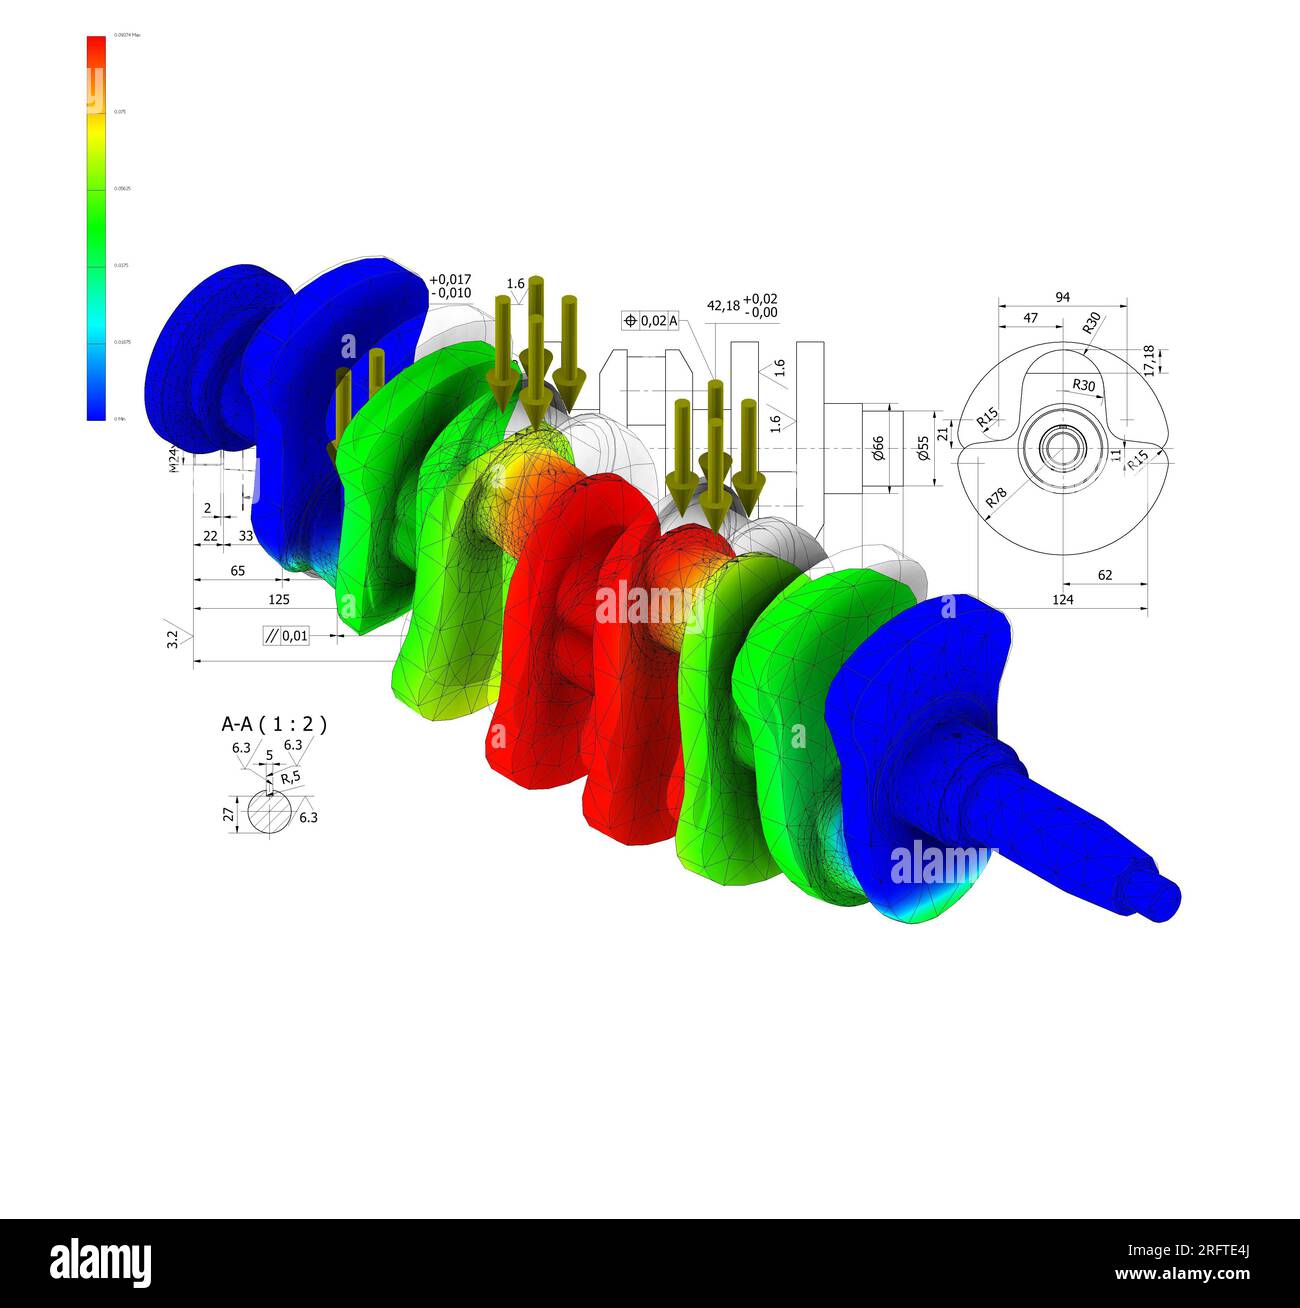 finite element method, FEM, and technical drawing crankshaft, testing fatigue and stress in the material Stock Photo